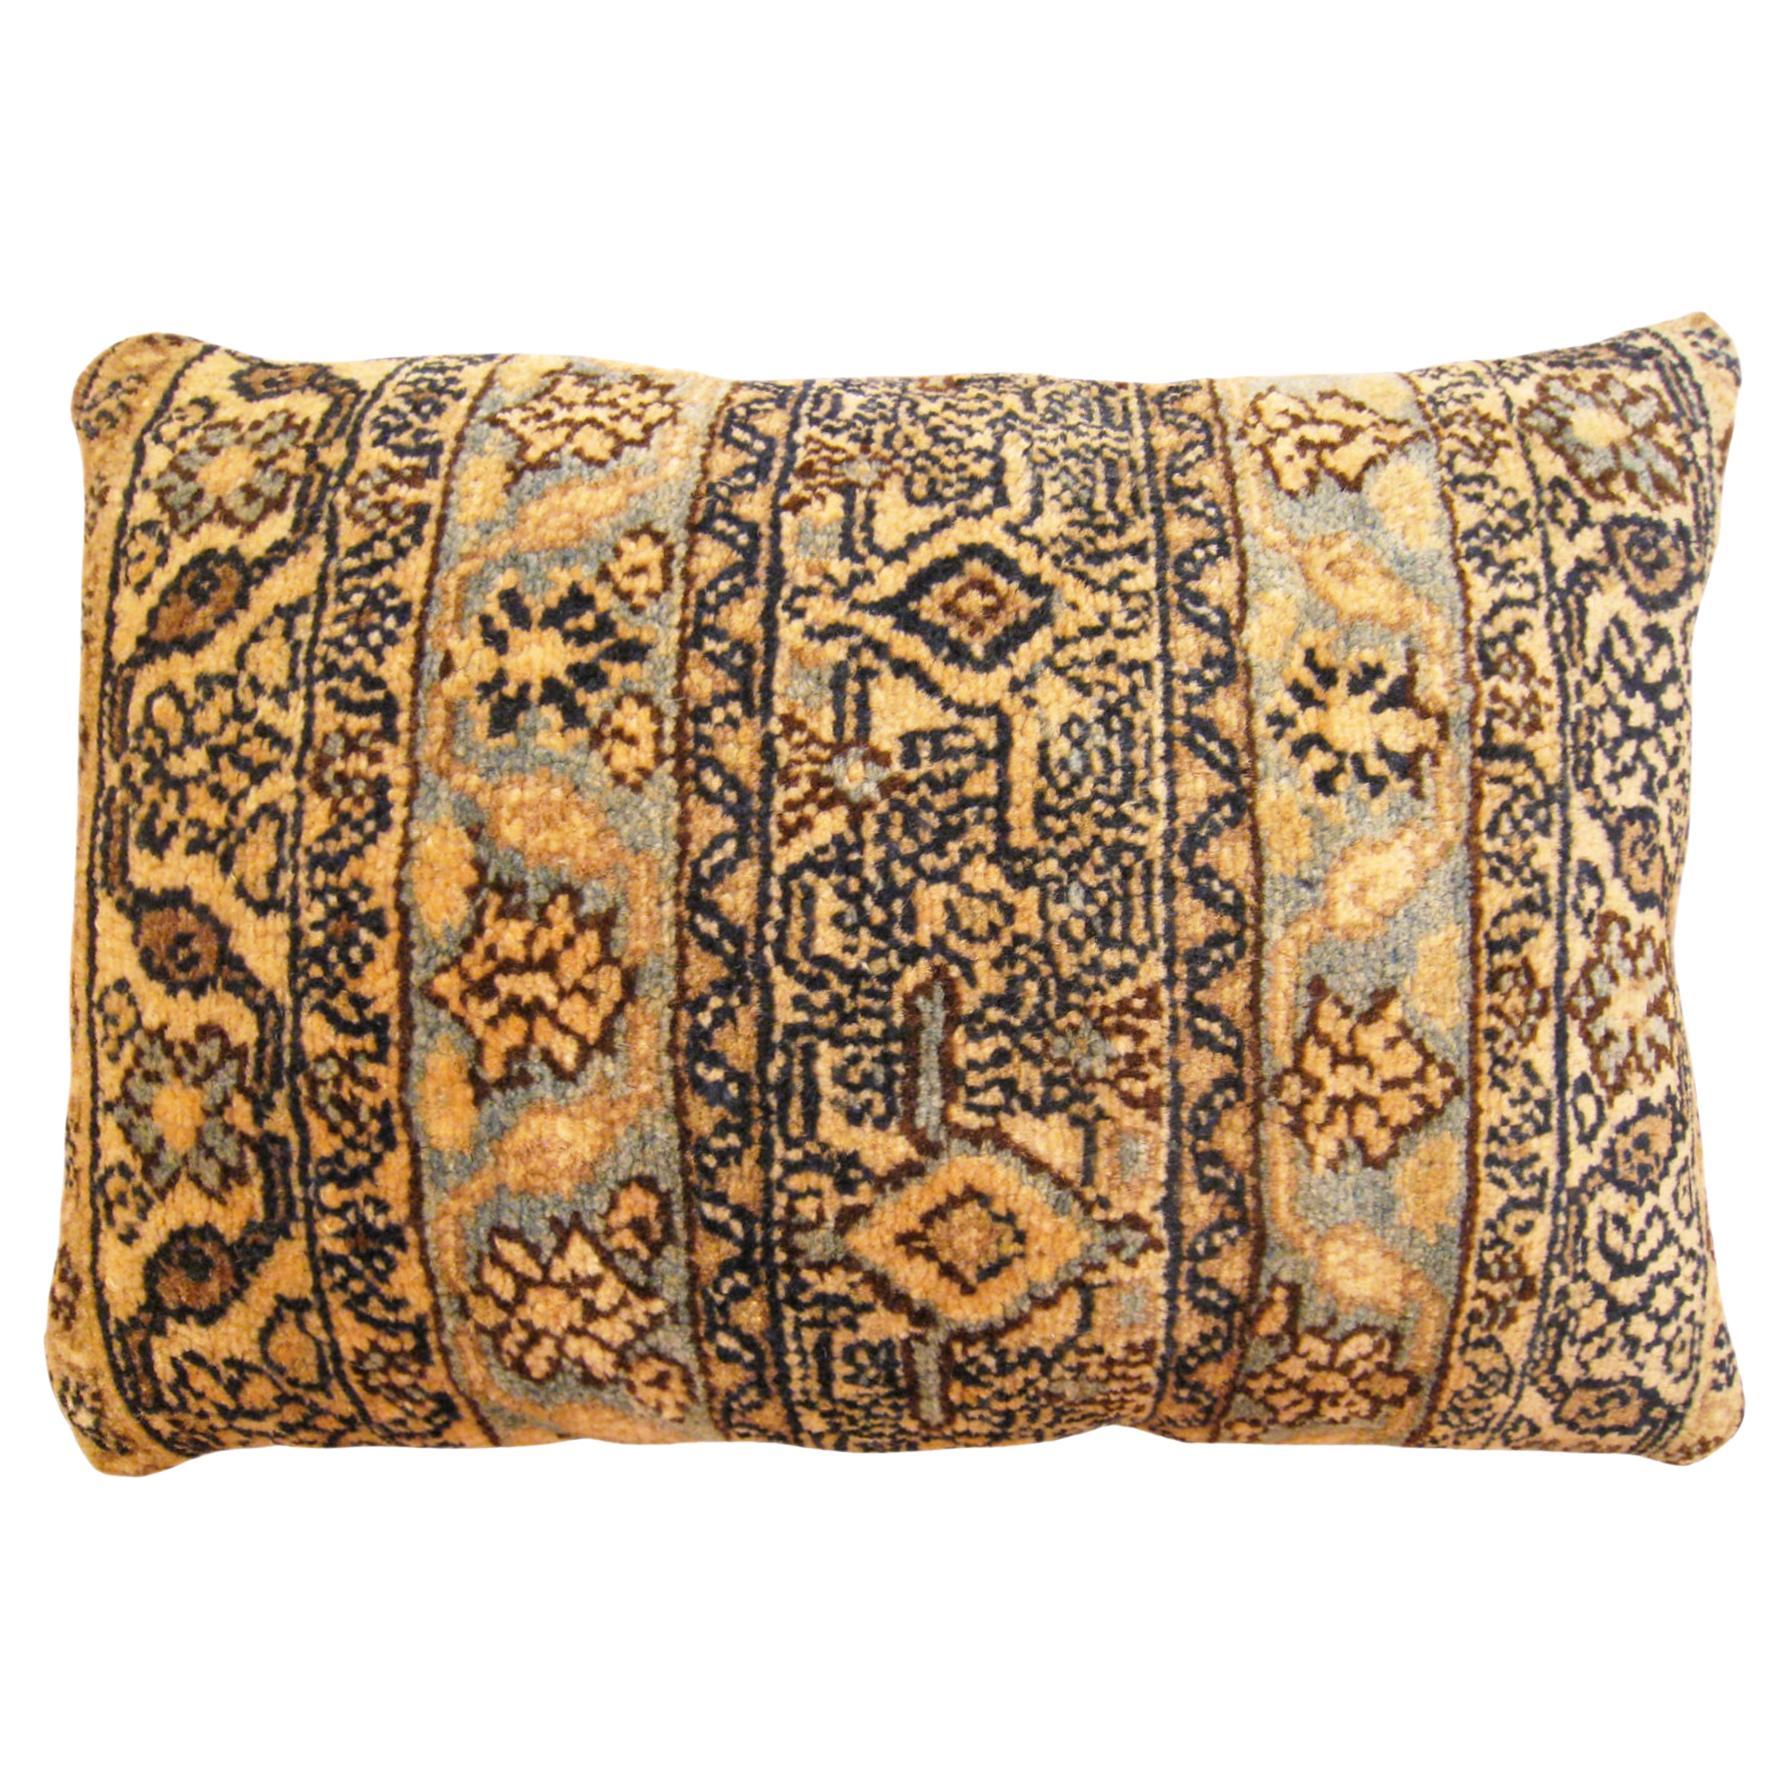 Decorative Antique Persian Hamadan Rug Pillow with Floral Elements Allover